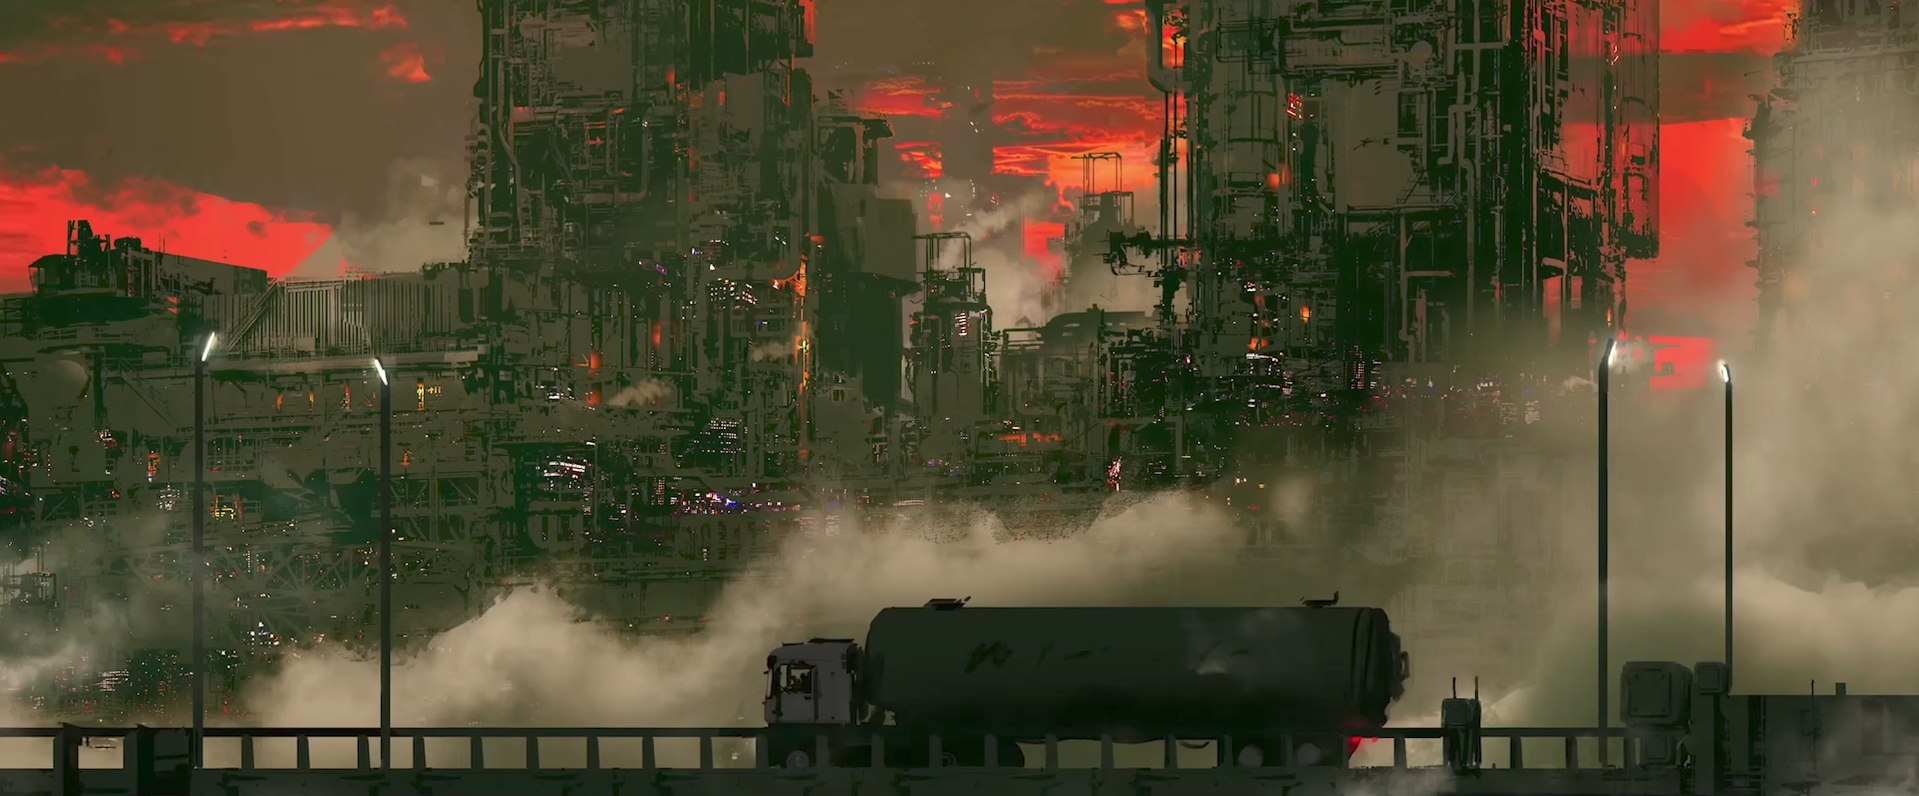 Blade Runner Is Getting A Short Anime From Cowboy Bebop’s Director